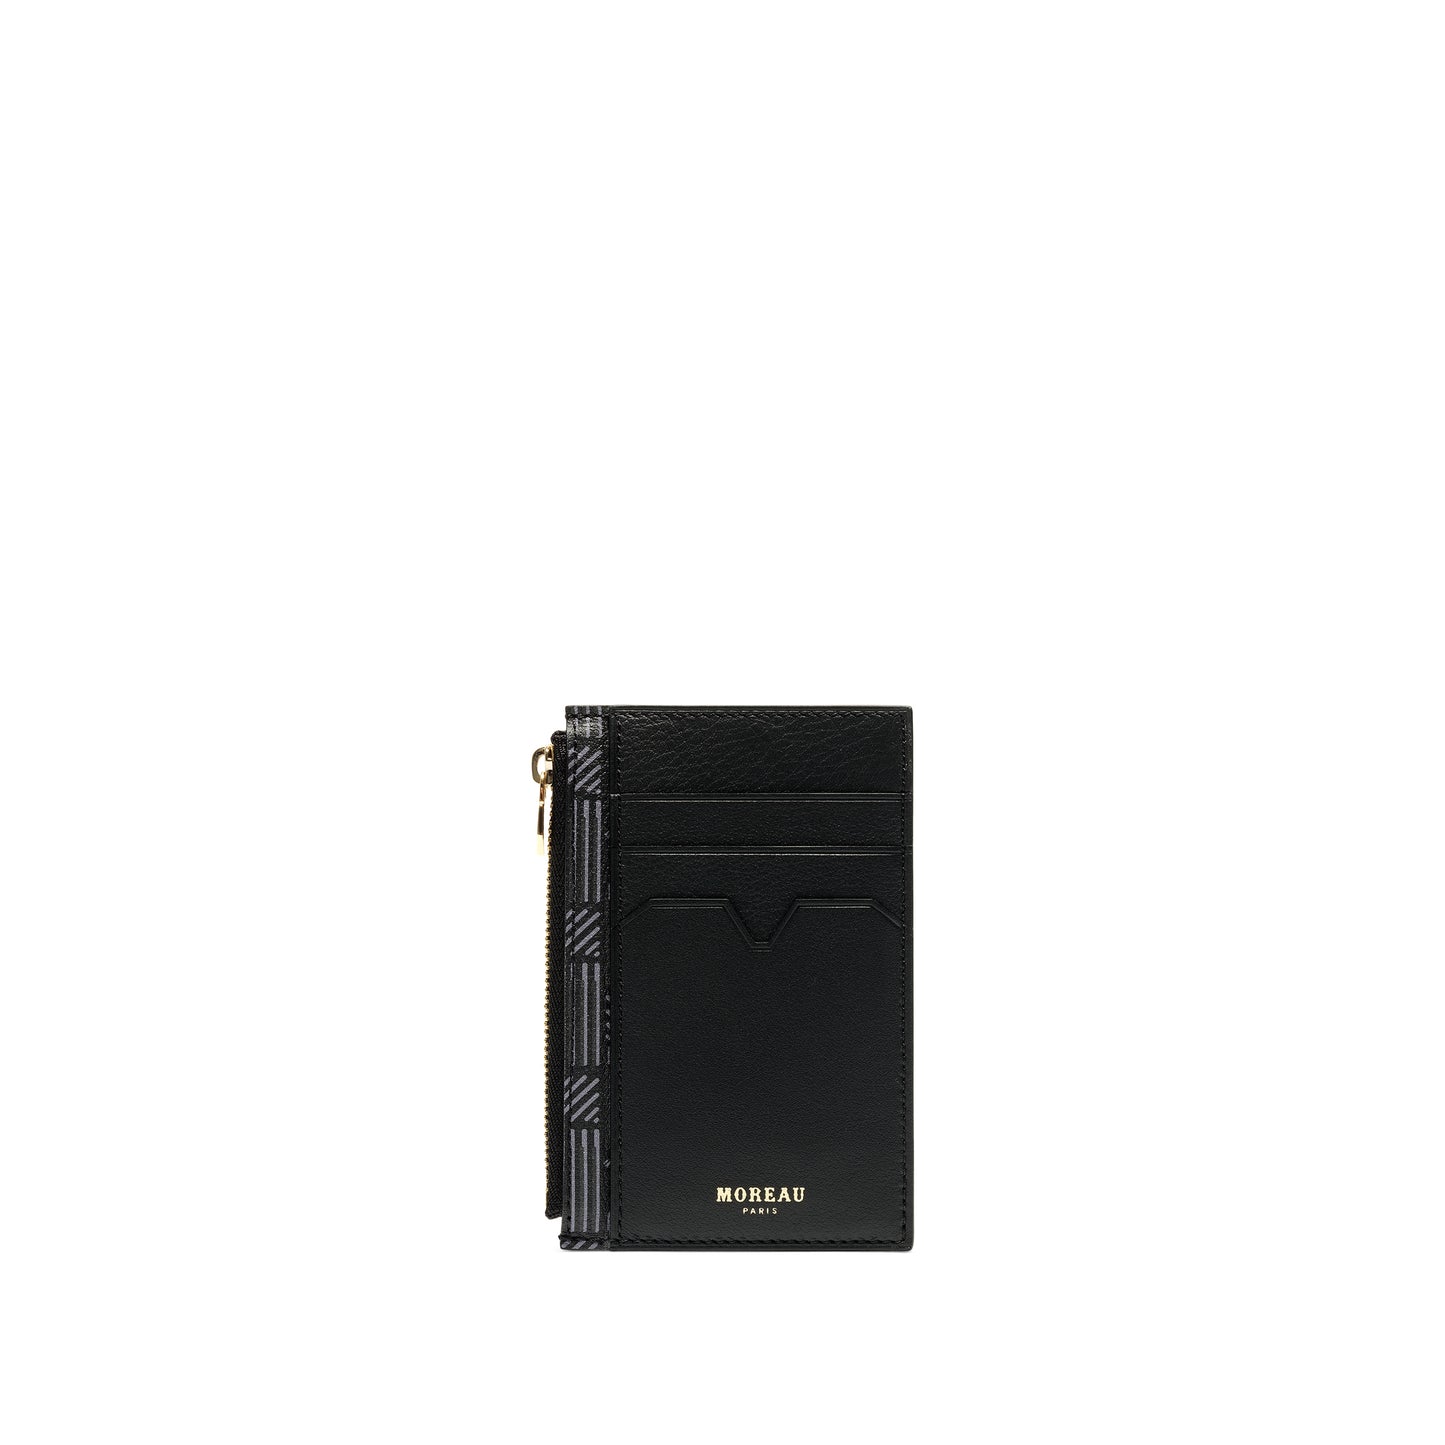 3 Credit Card Holder with Zip in Black